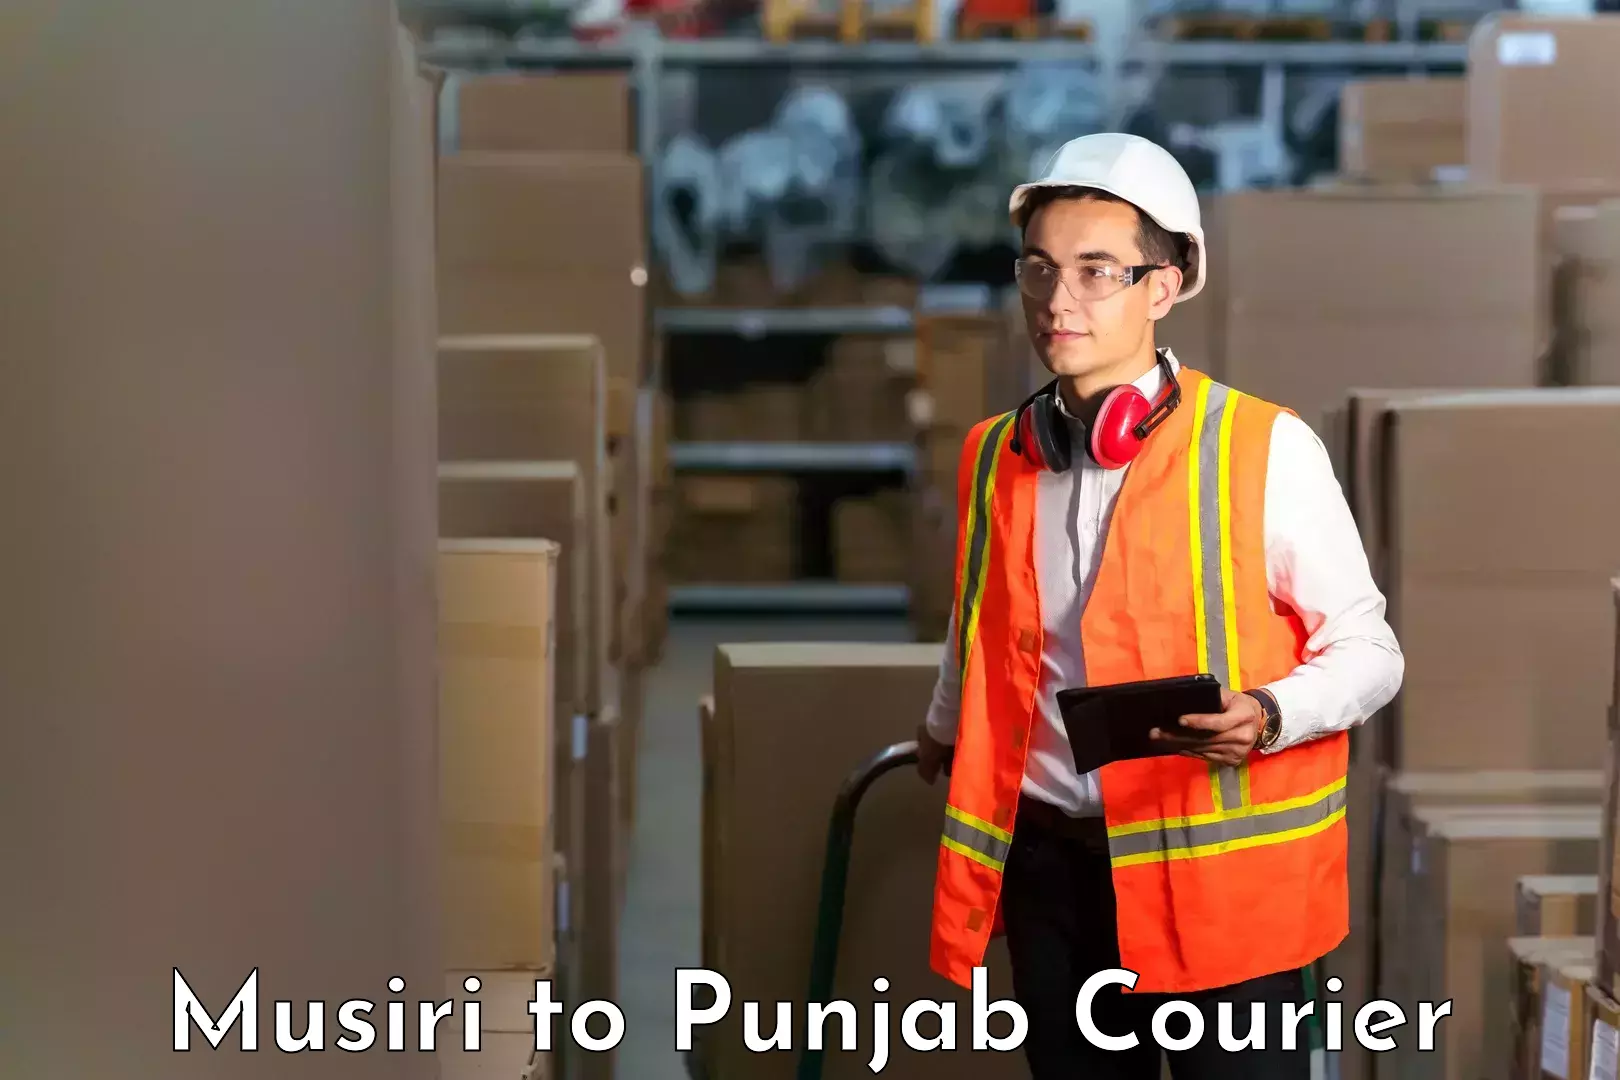 Reliable parcel services Musiri to Punjab